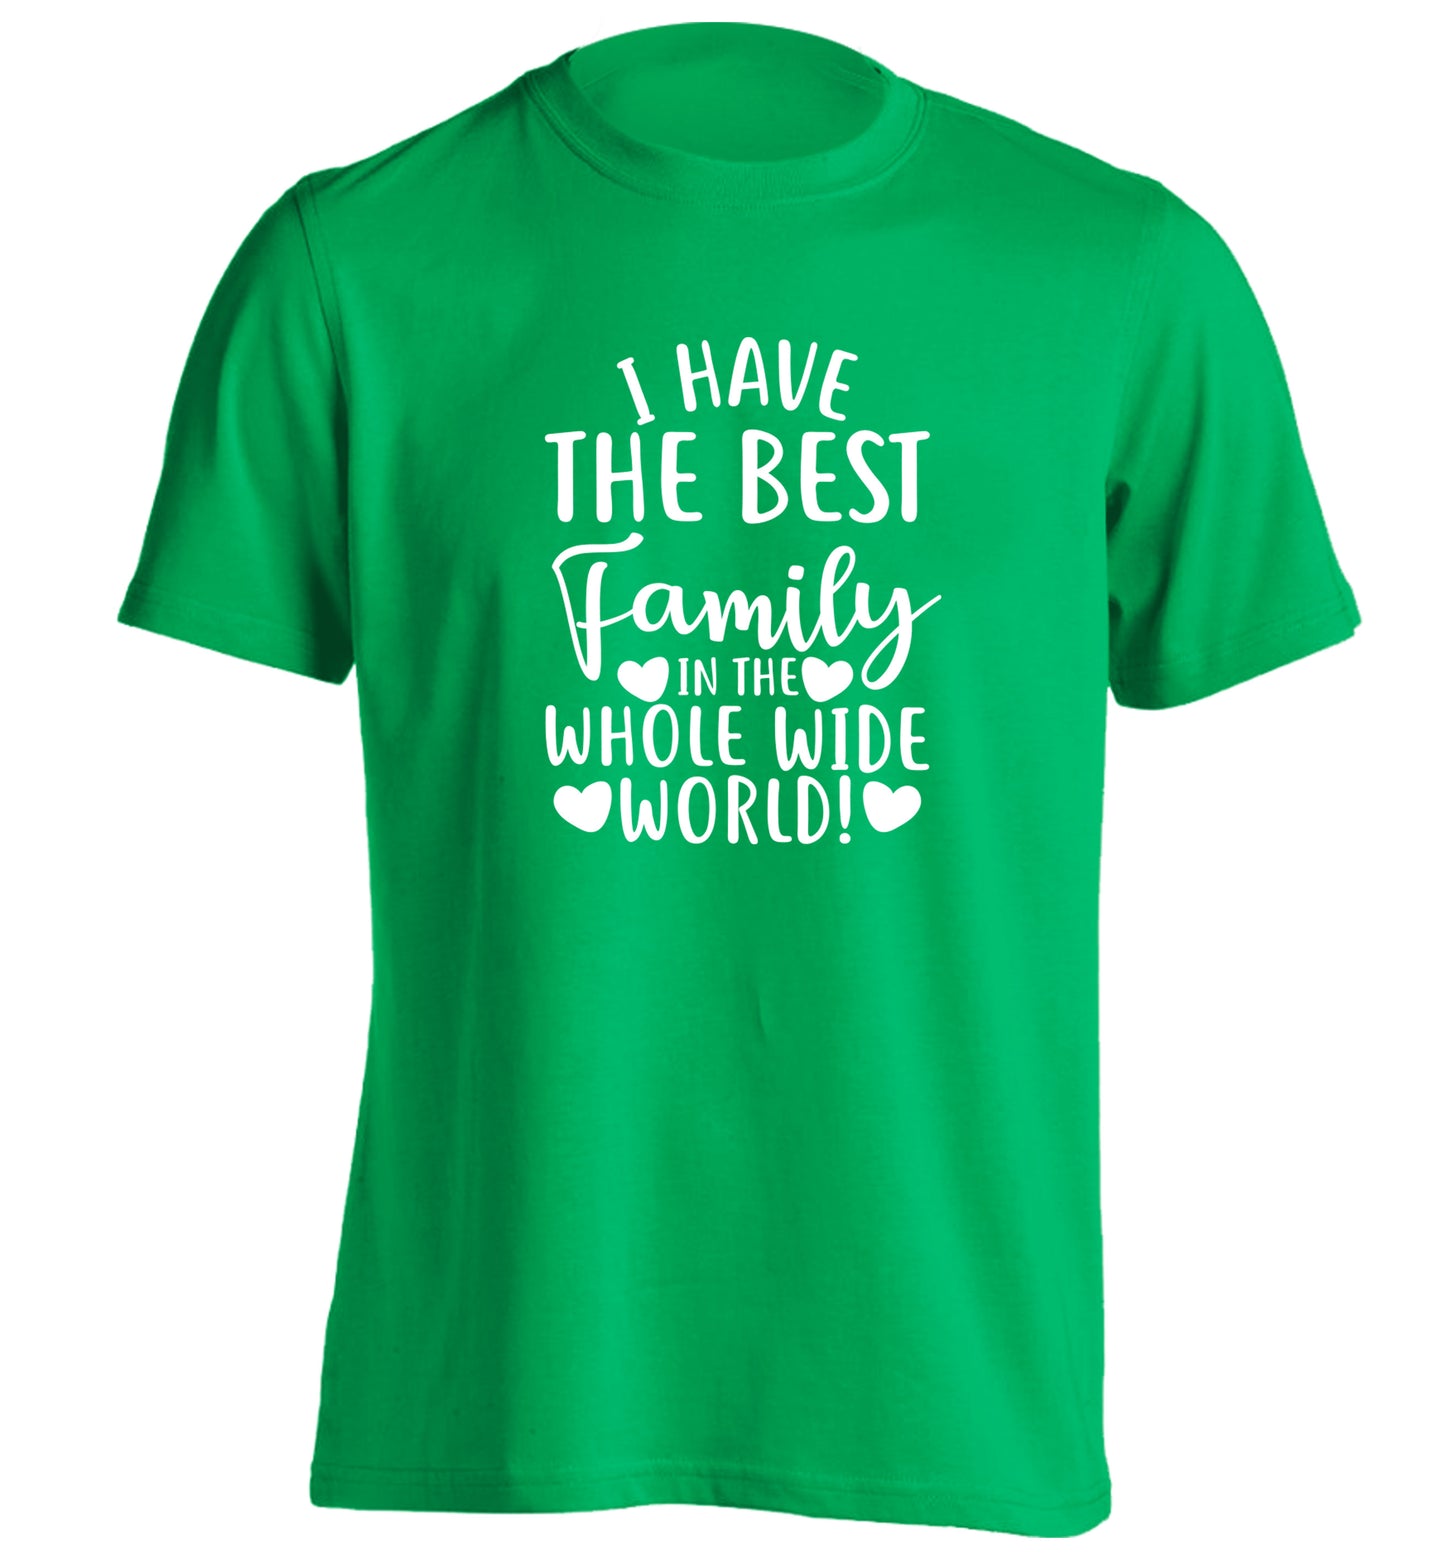 I have the best family in the whole wide world! adults unisex green Tshirt 2XL